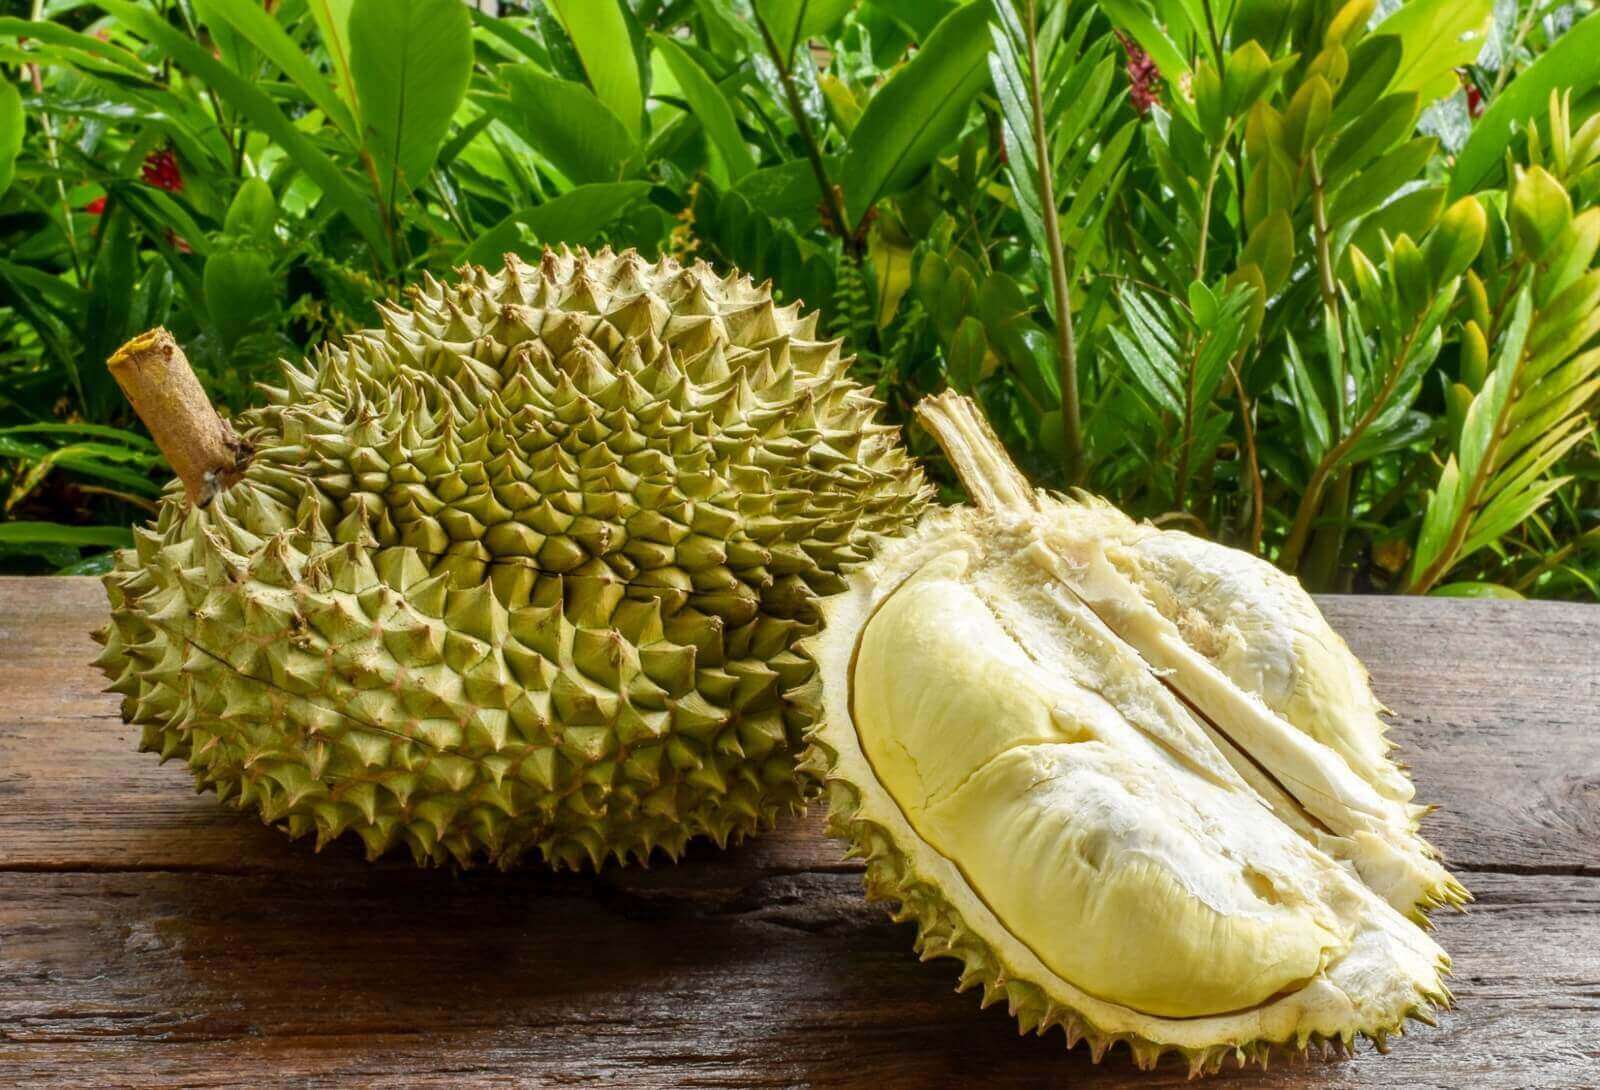 (Expired)Profitable Durian (Profit 150K - 300K) Looking For Loan (5% Monthly Return)